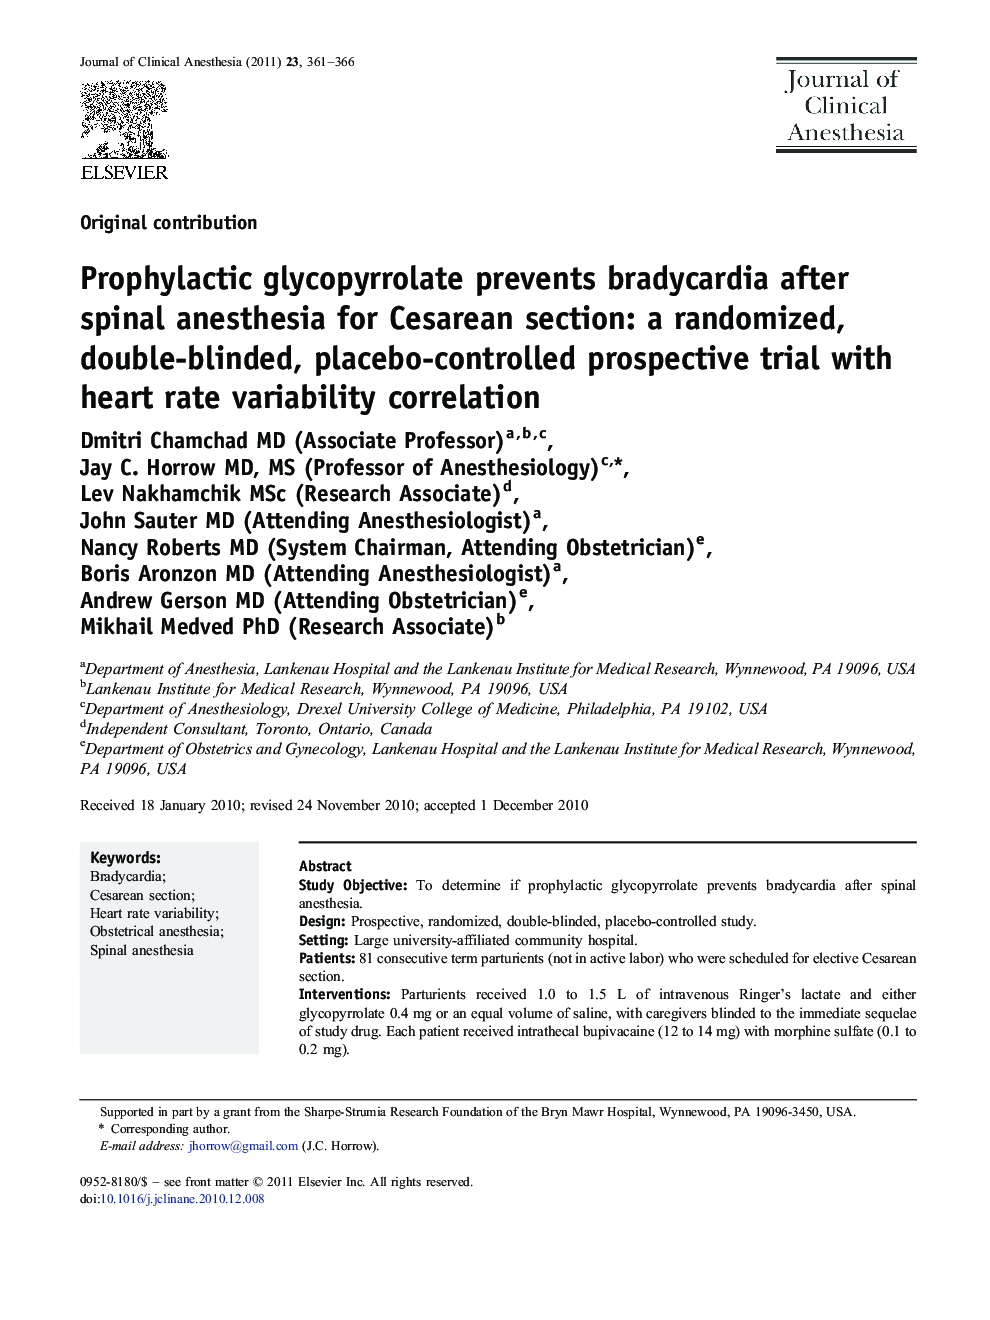 Prophylactic glycopyrrolate prevents bradycardia after spinal anesthesia for Cesarean section: a randomized, double-blinded, placebo-controlled prospective trial with heart rate variability correlation 